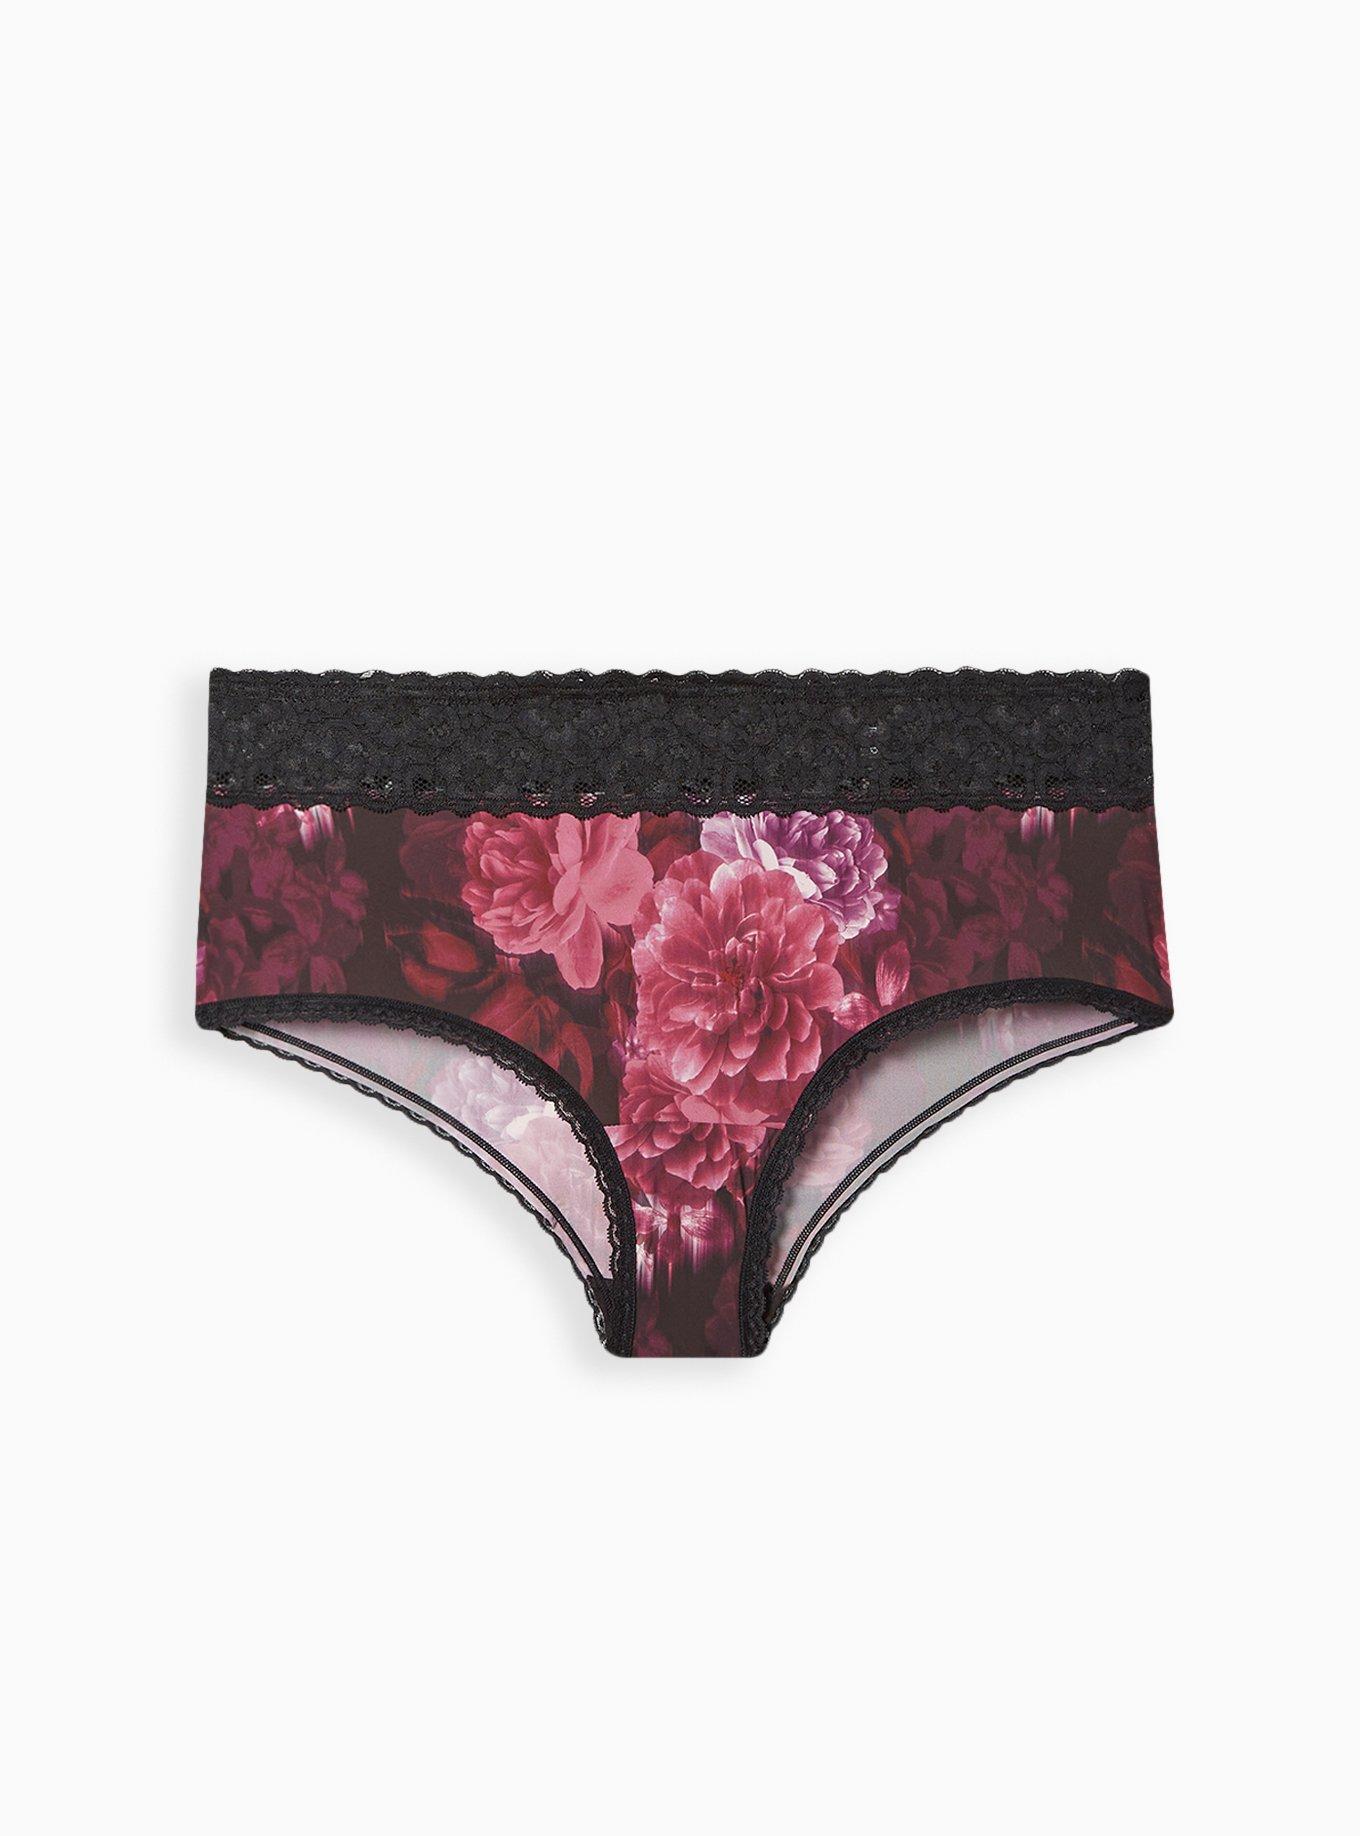 Ardene Contrast Lace Cheeky Panty in Blush, Size Small